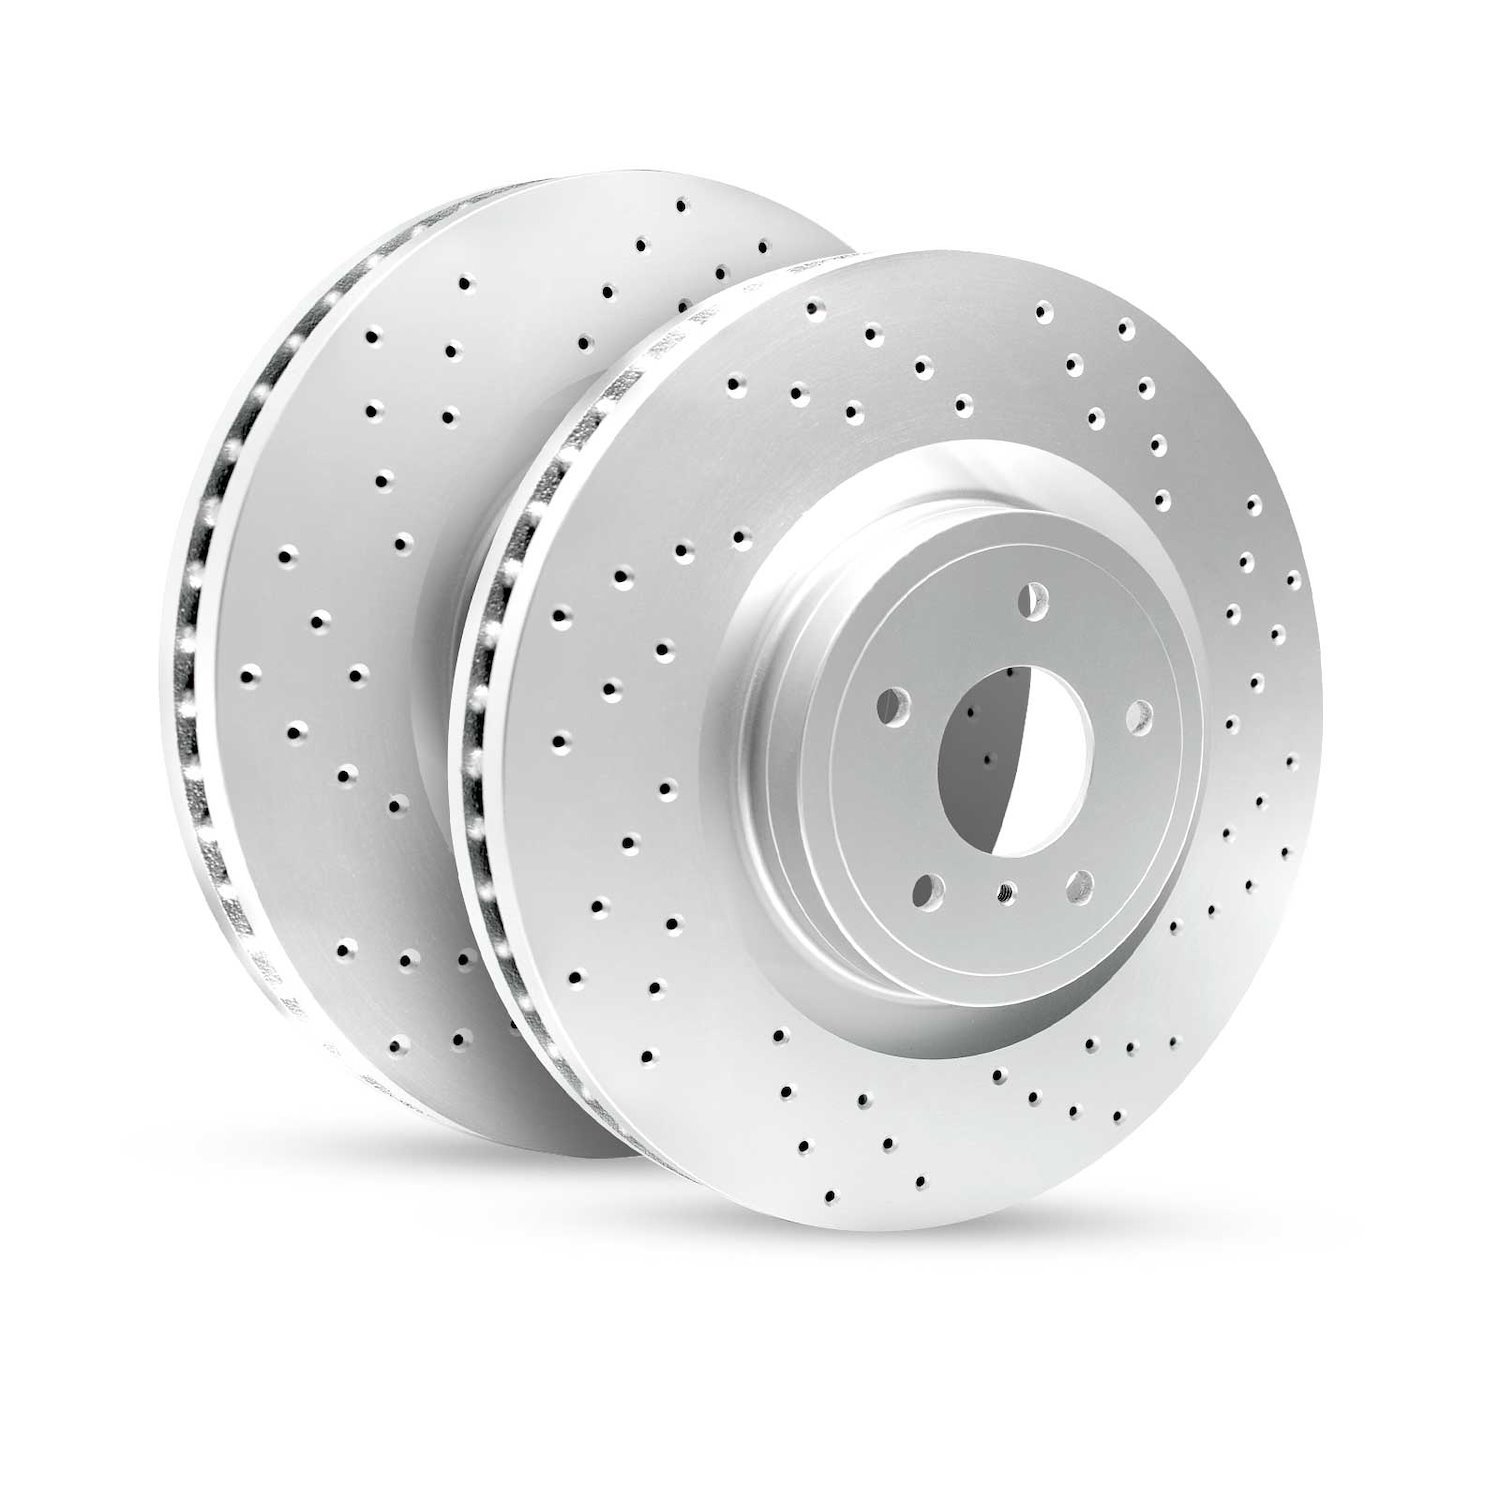 GEO-Carbon Drilled/Slotted Rotors, 2008-2016 Fits Multiple